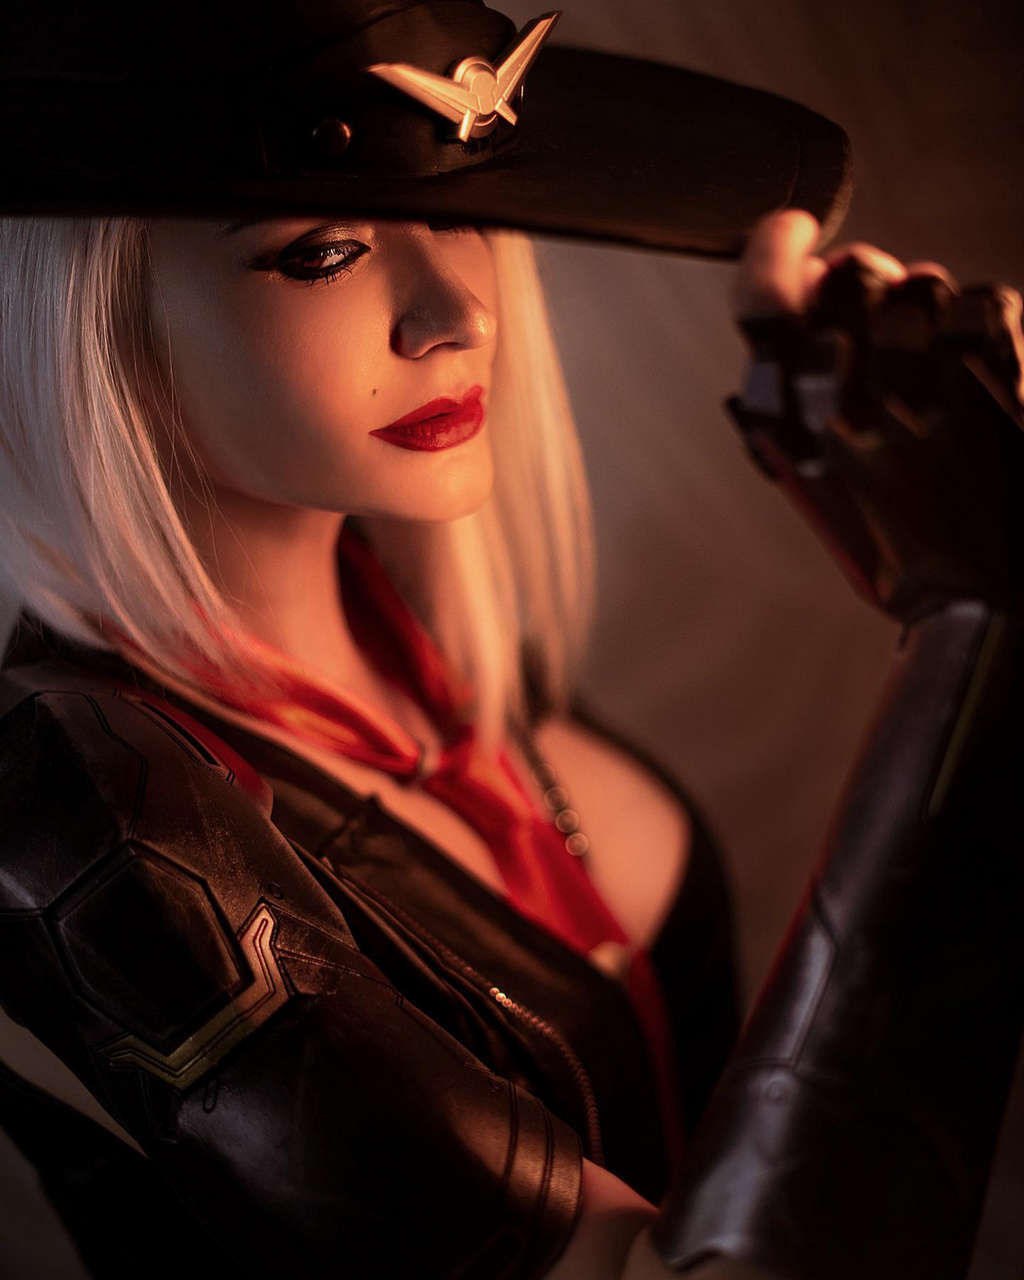 Ashe From Overwatch By By Yulli